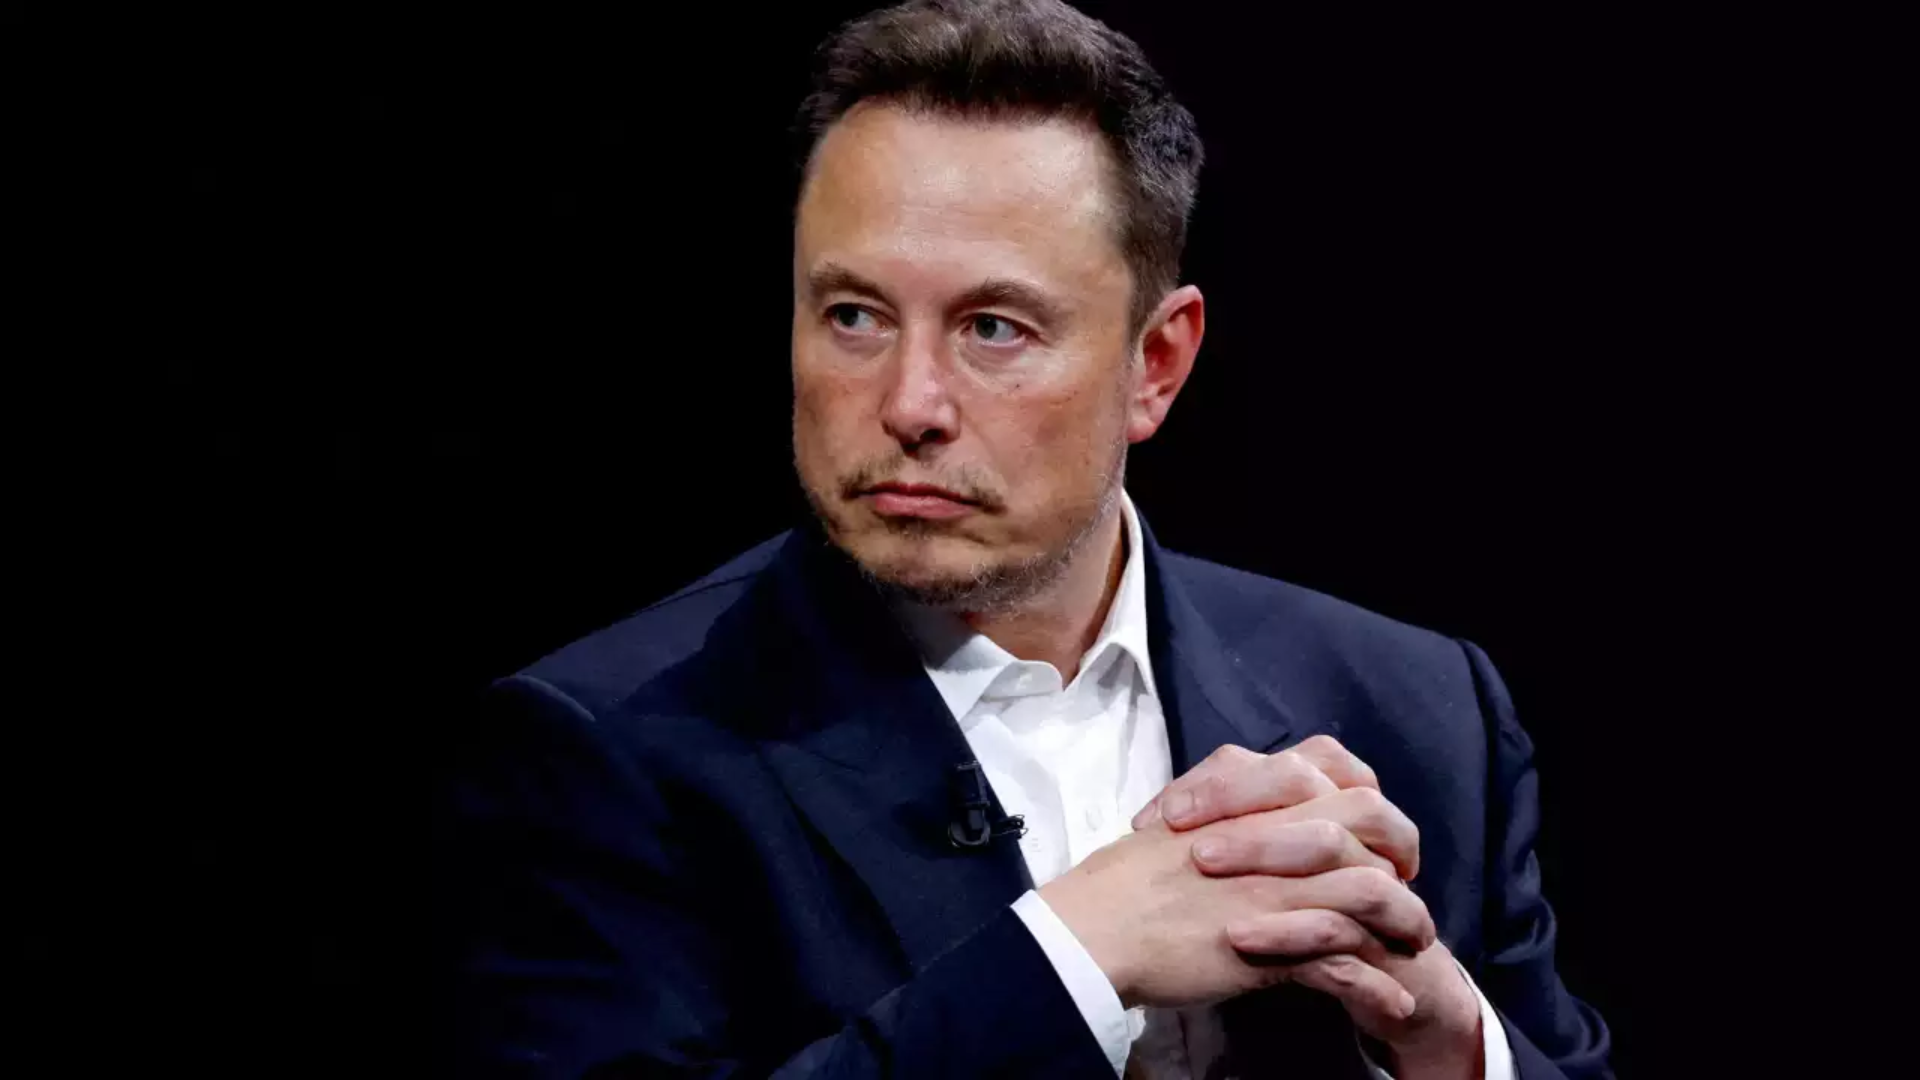 Elon Musk apology: Tesla severance packages ‘Incorrectly Low'” to laid-off employees